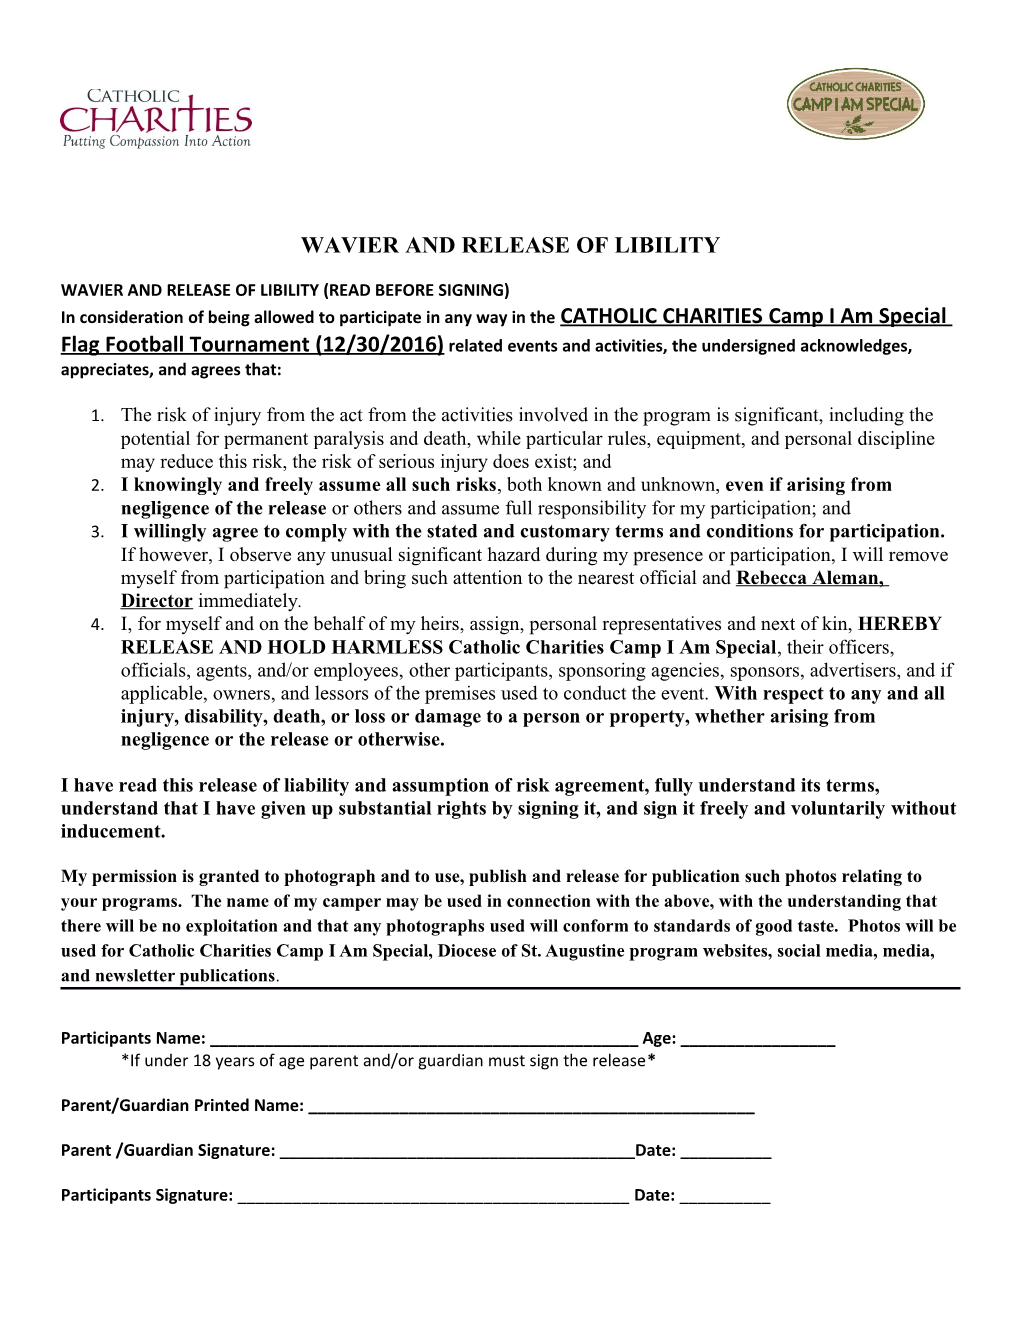 Wavier and Release of Libility (Read Before Signing)